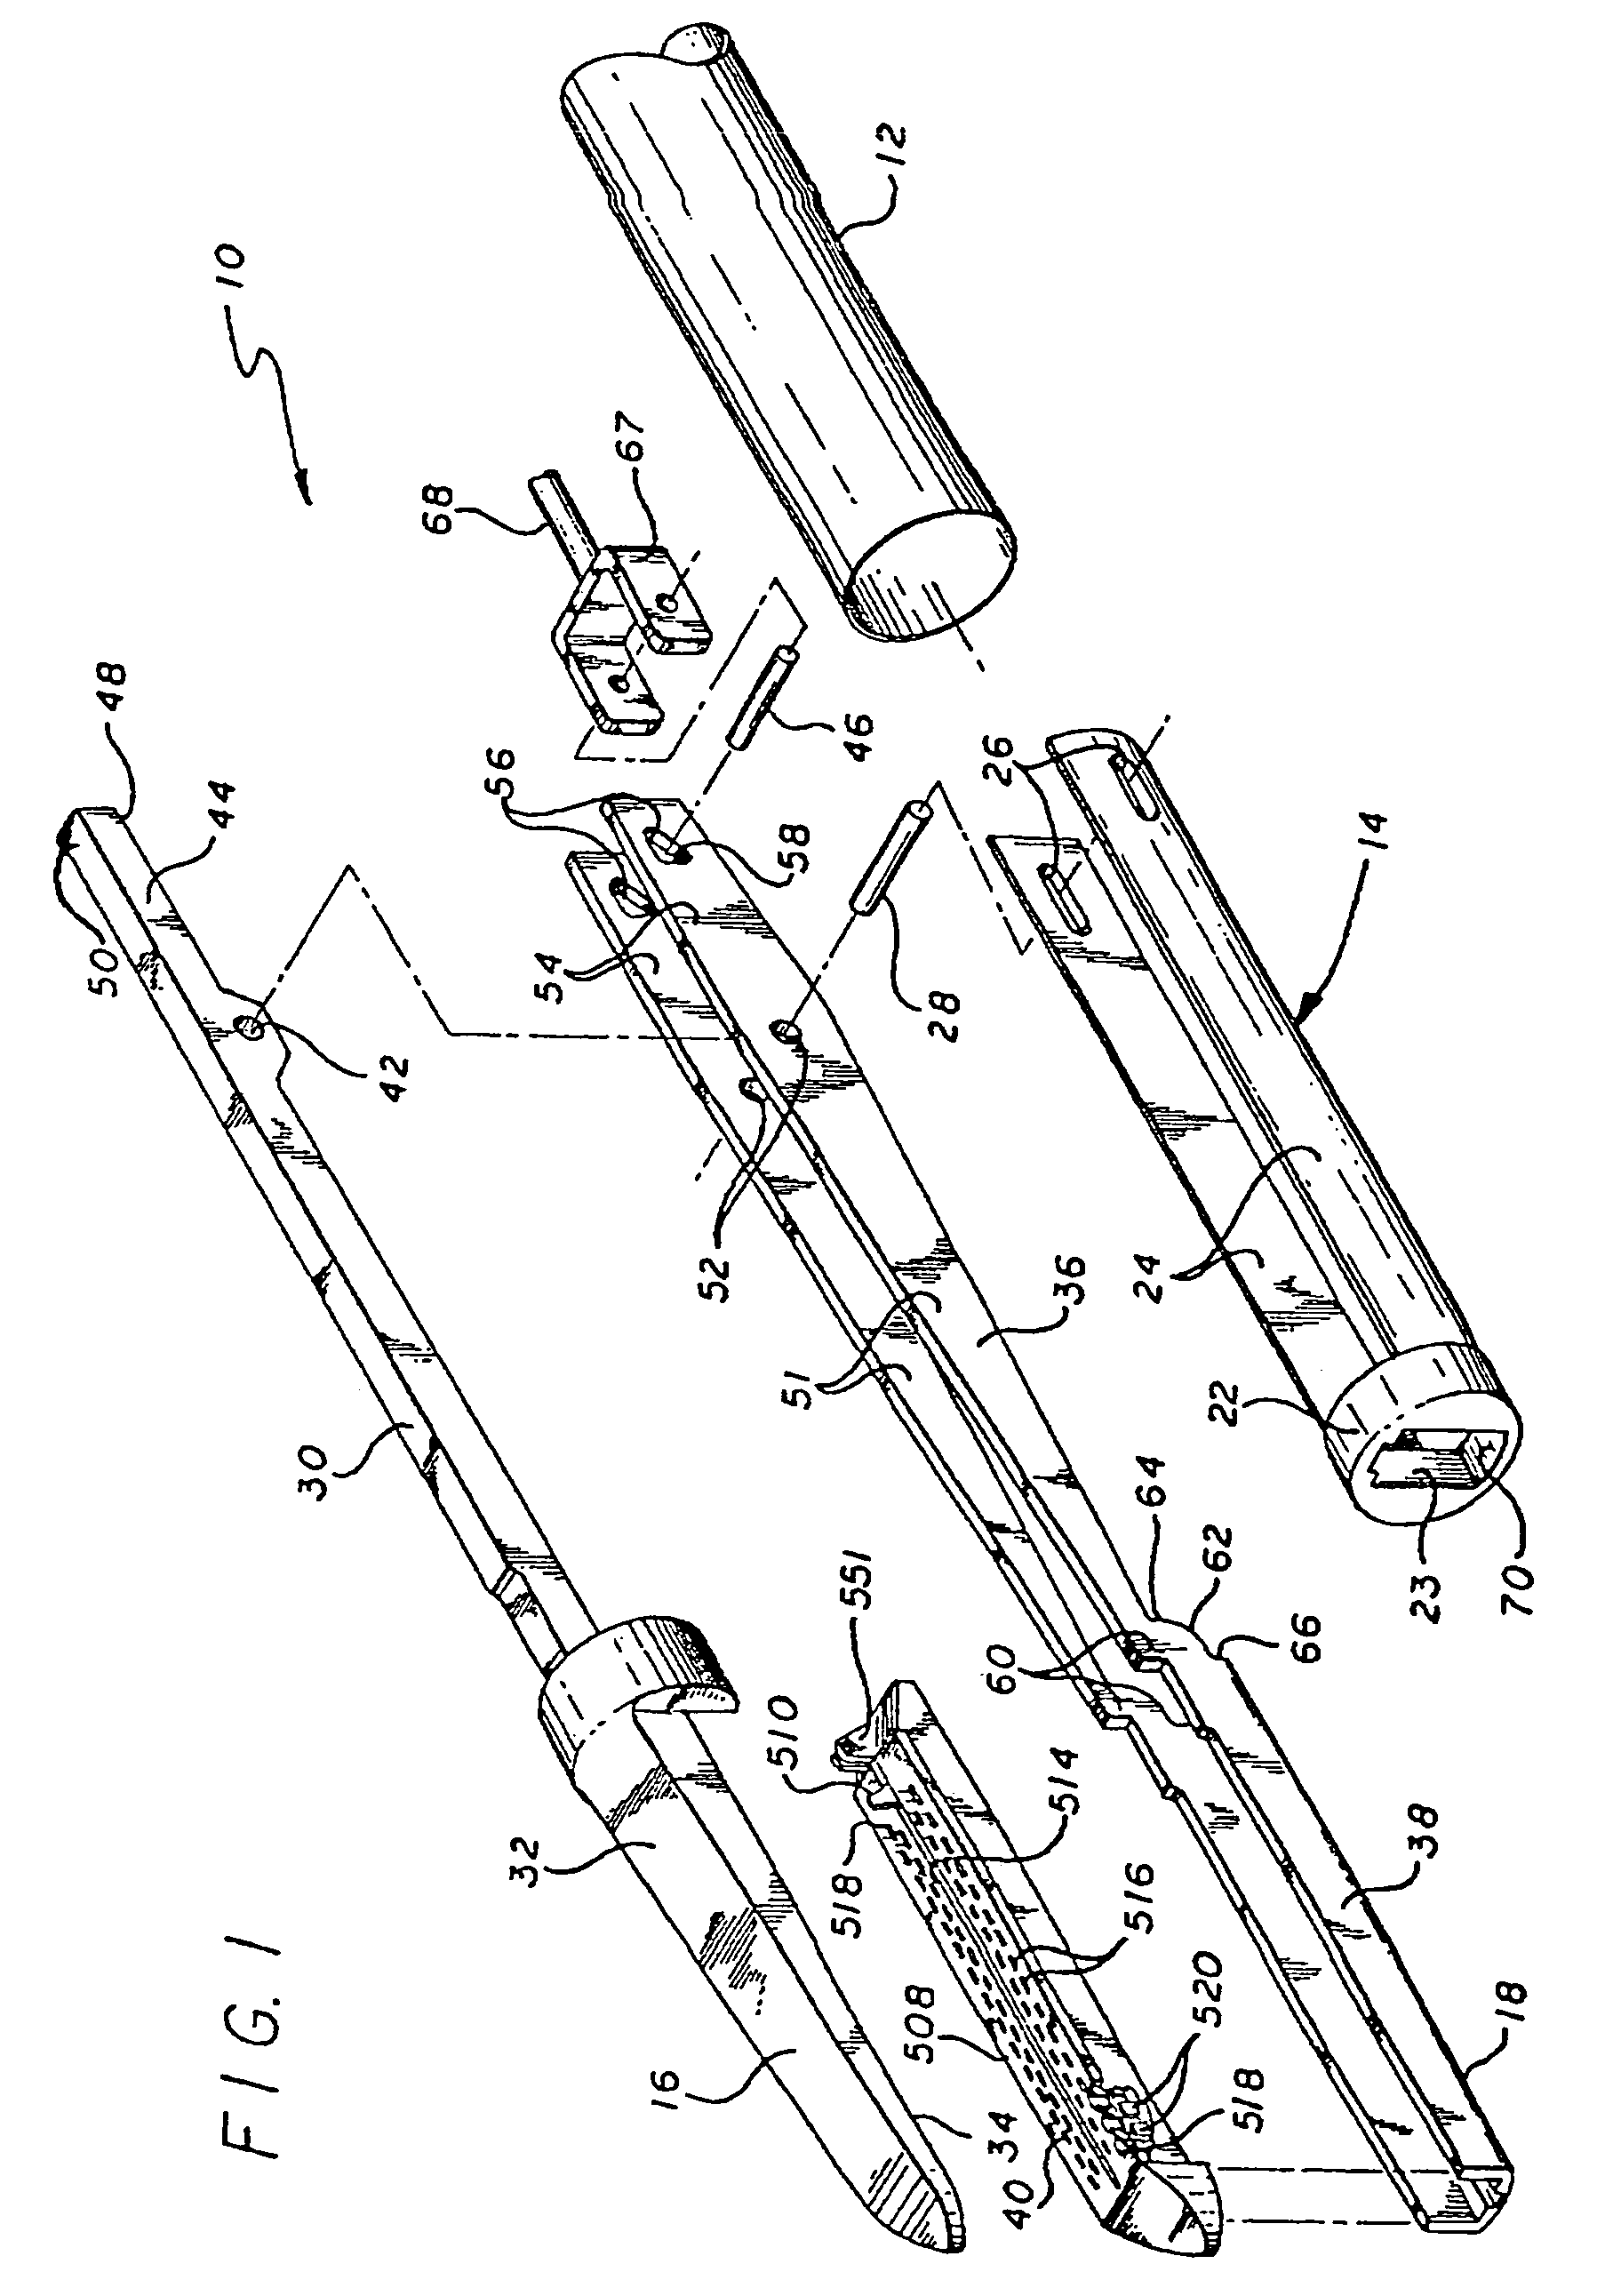 Surgical instrument having an articulated jaw structure and a detachable knife